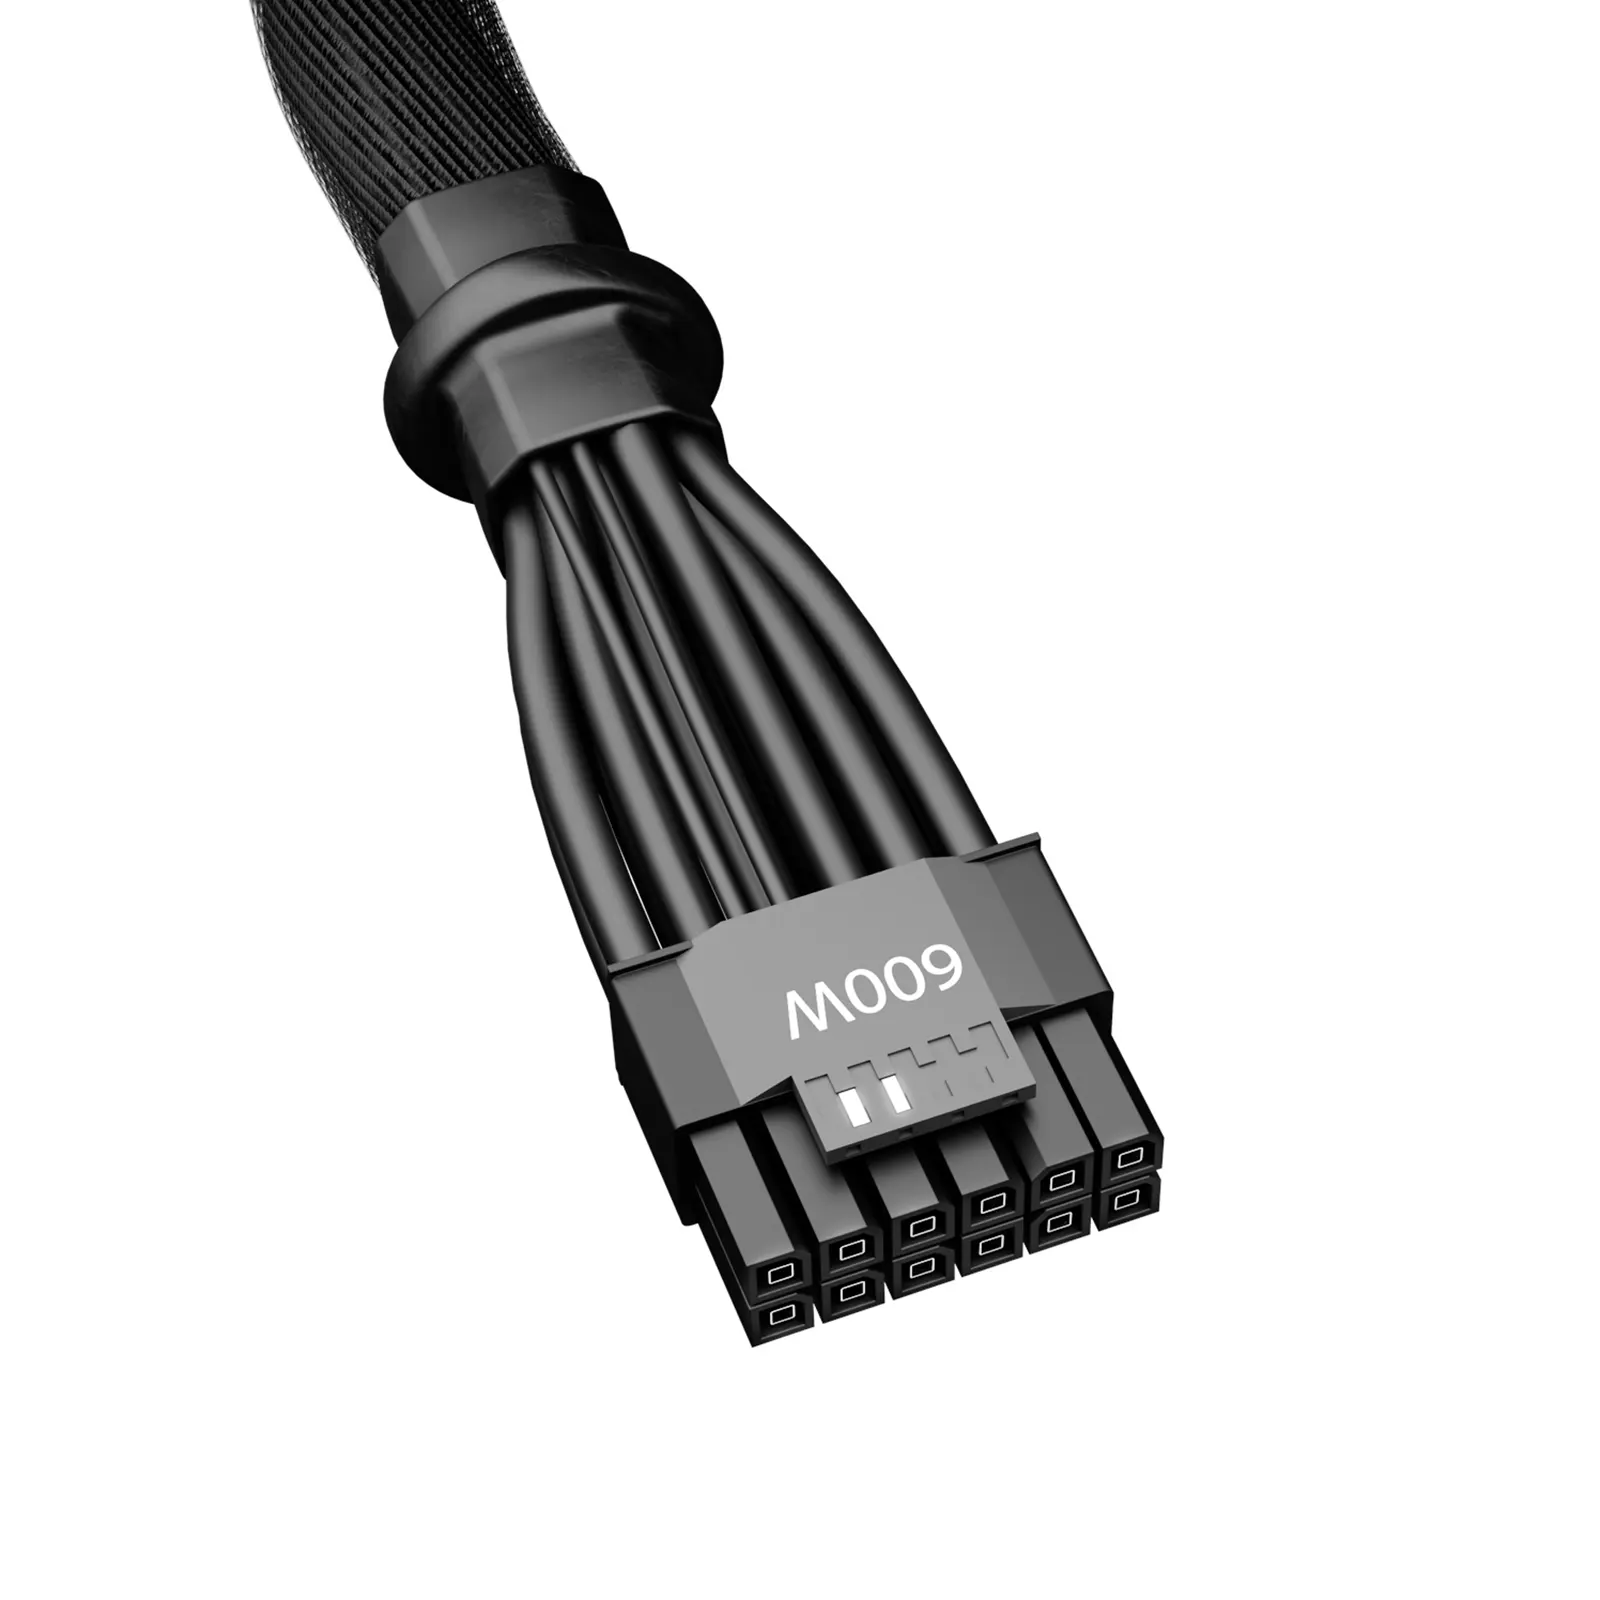 be quiet! 12VHPWR Adapter Cable, 12VHPWR (M) to 2 x 12-Pin PCIe (M + M), 0.6m, Black, 600W Rated, Individually Black Sleeved, Handles All Graphics Cards Requiring an 12VHPWR Connector